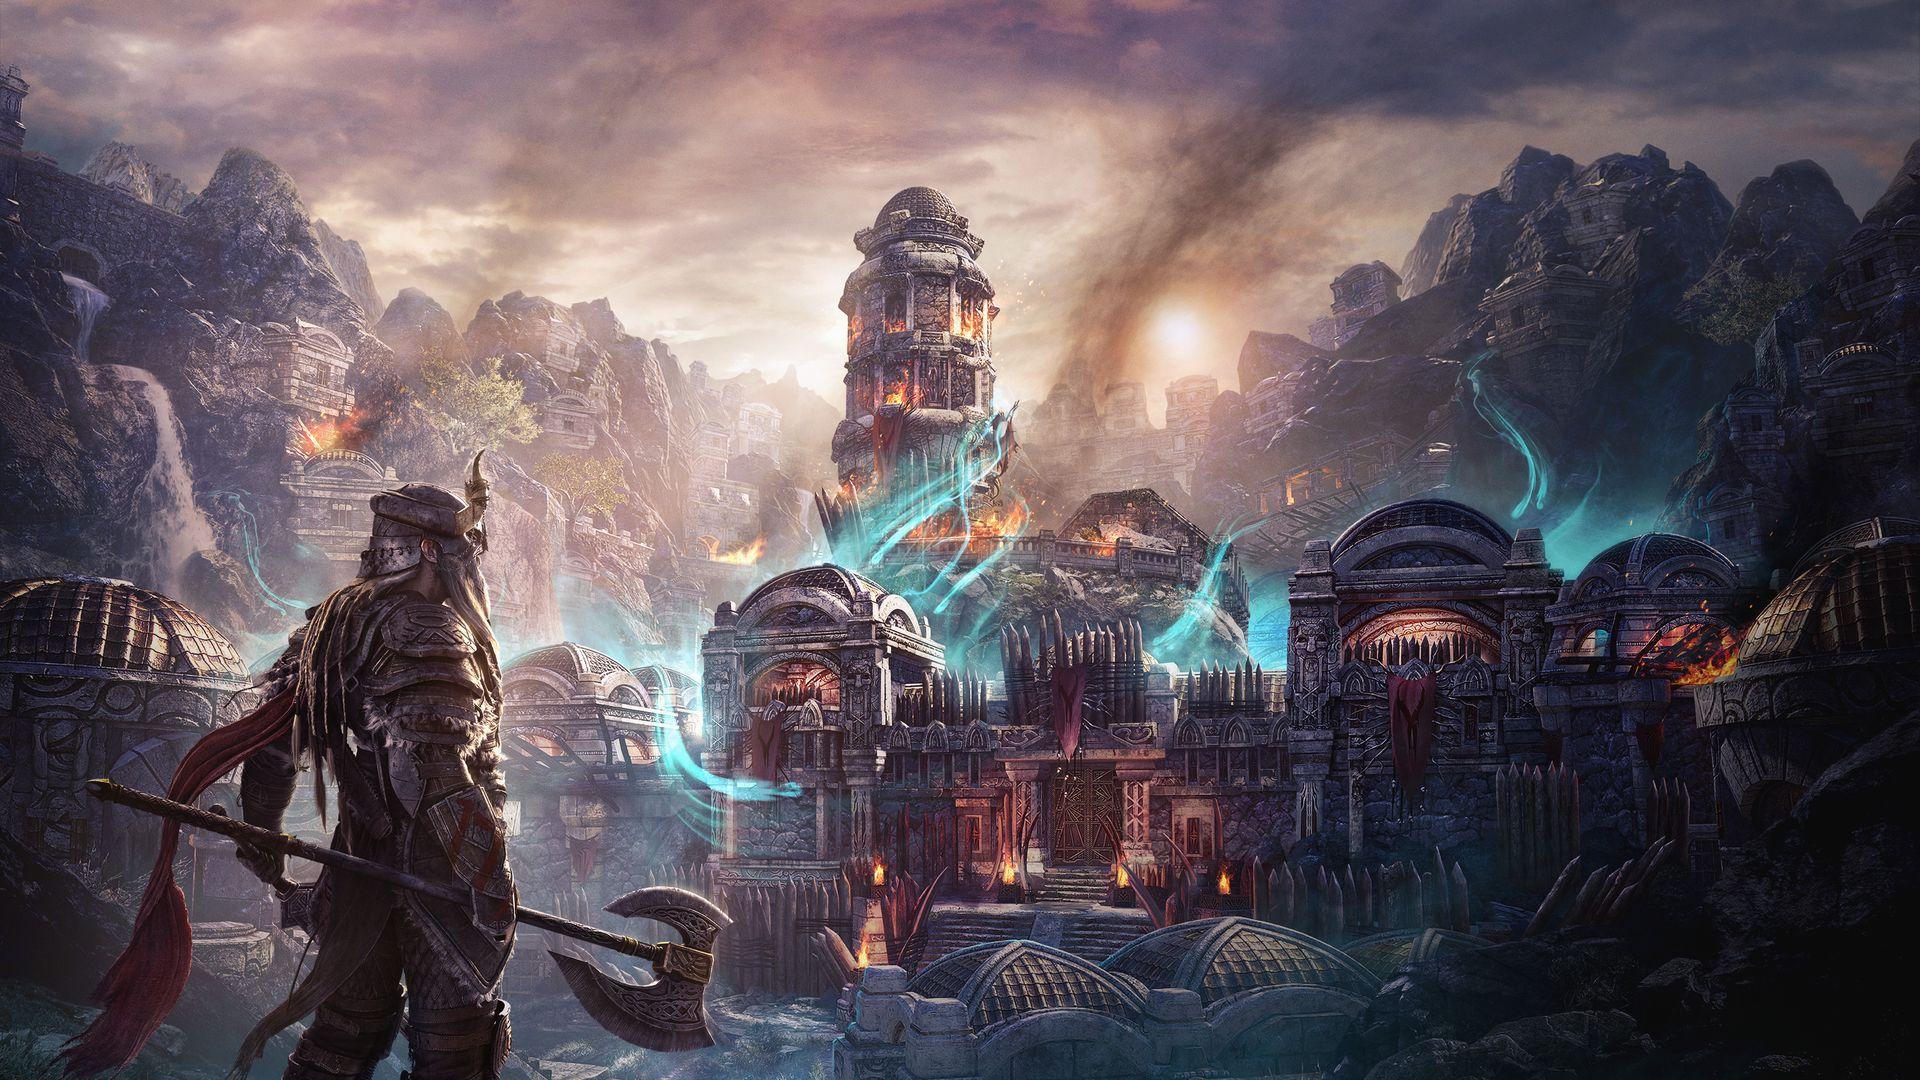 The Elder Scrolls Online We Re Excited To Let You Know That In Order To Get Ahead Of The New Next Gen Console Launches Next Week We Re Shifting The Console Launch Of